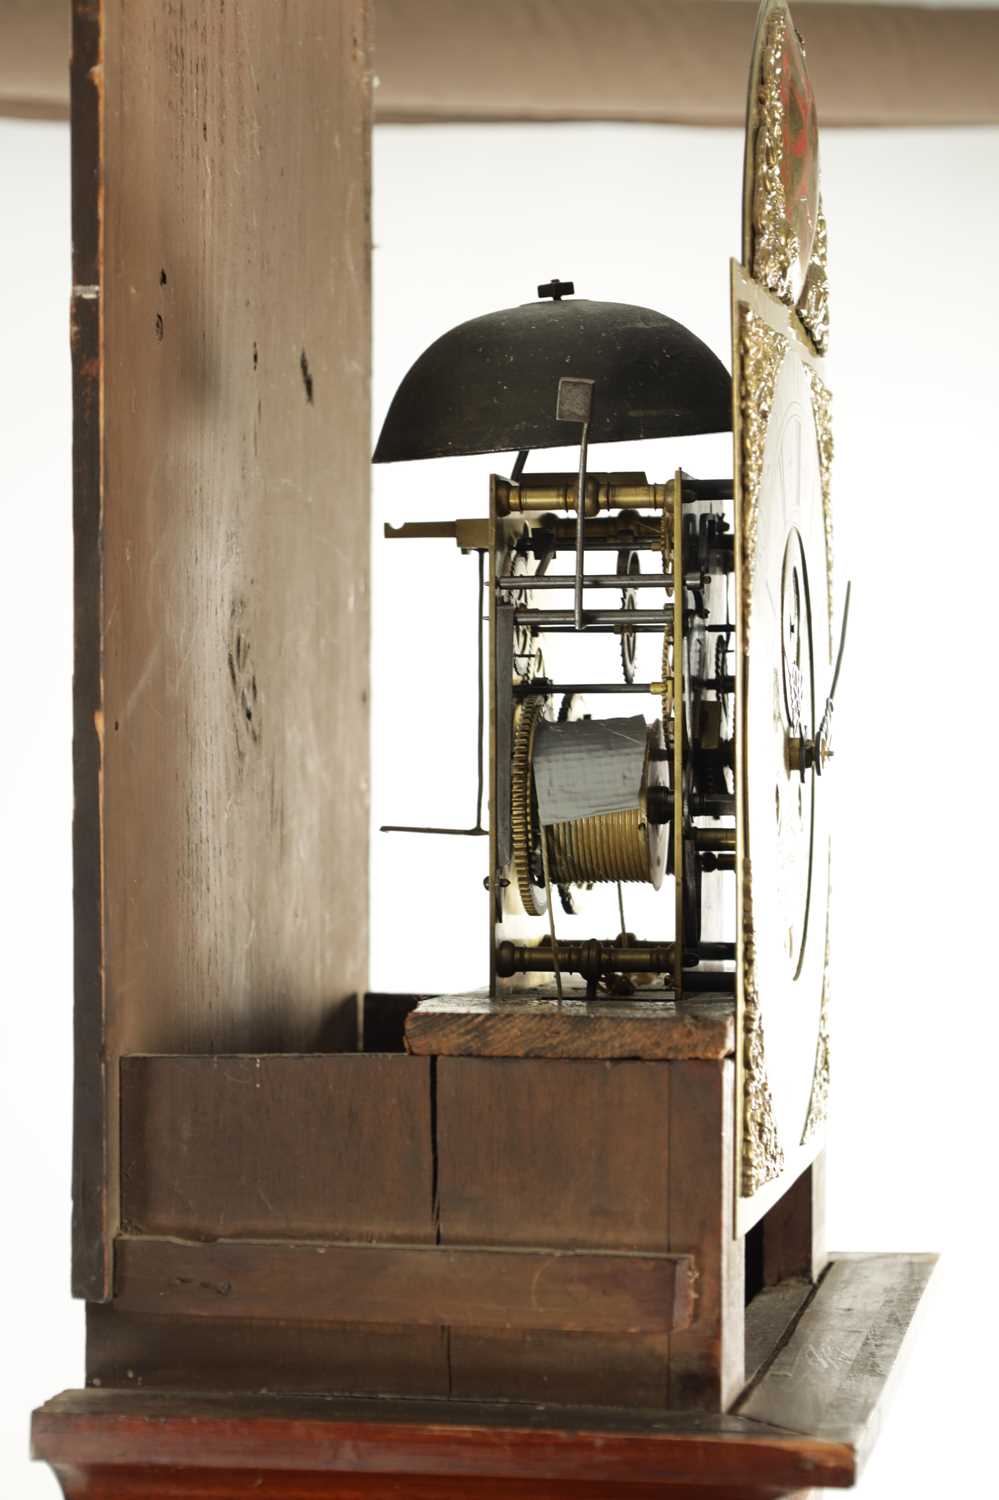 R. HENDERSON, SCARBROUGH. A MID 18TH CENTURY FIGURED MAHOGANY LONGCASE CLOCK - Image 7 of 8